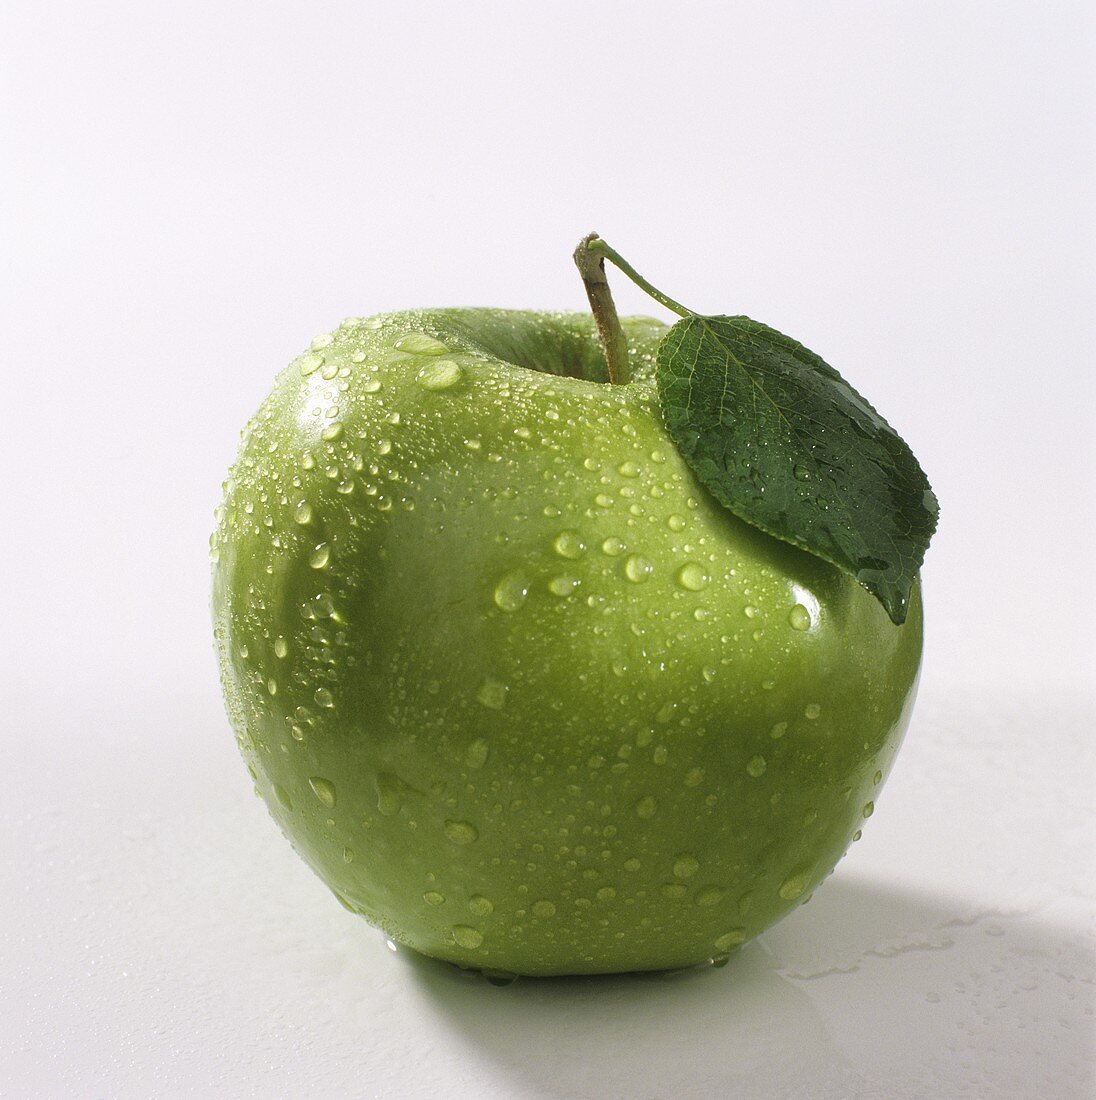 A Granny Smith with drops of water